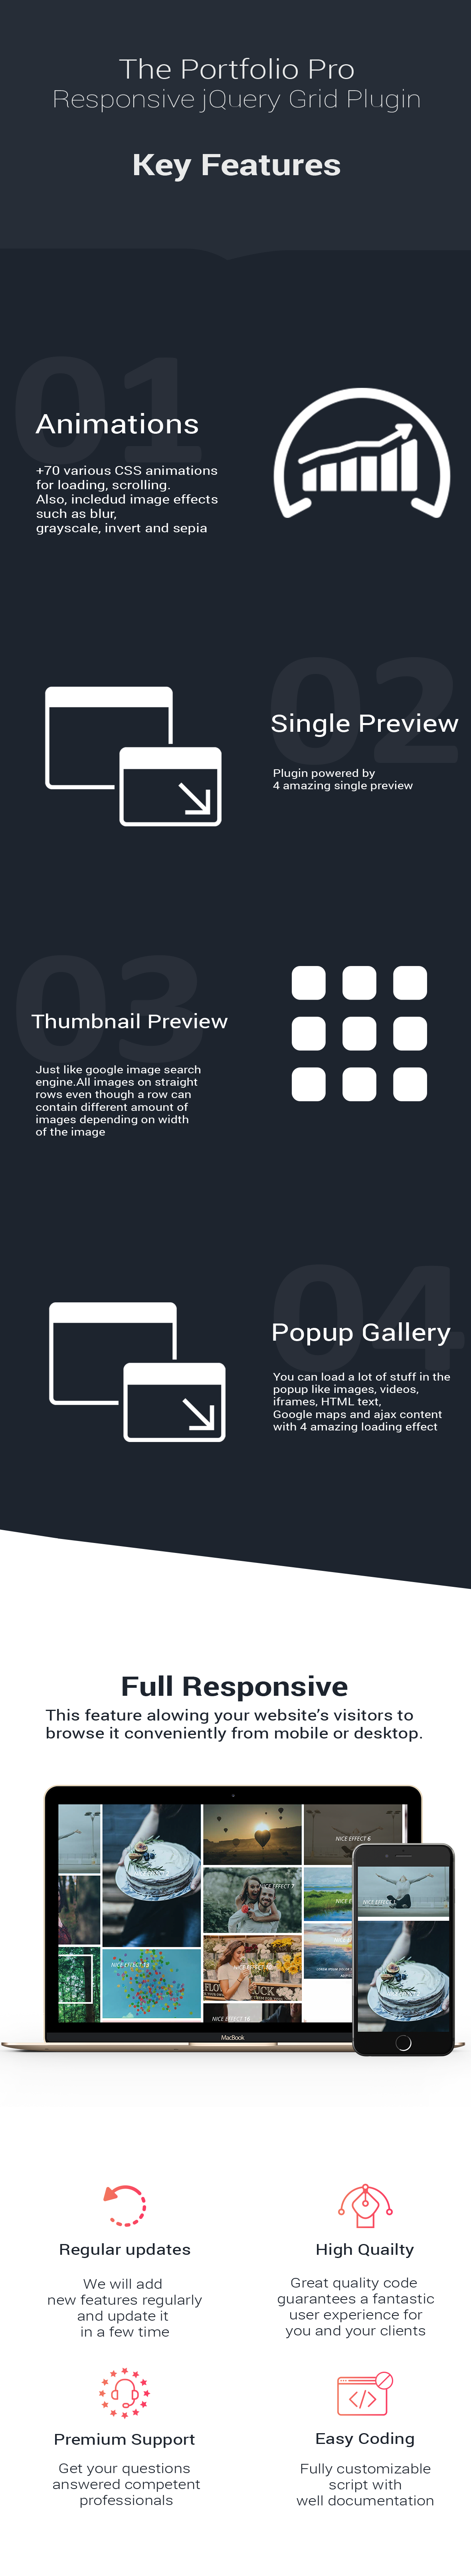 features of image gallery